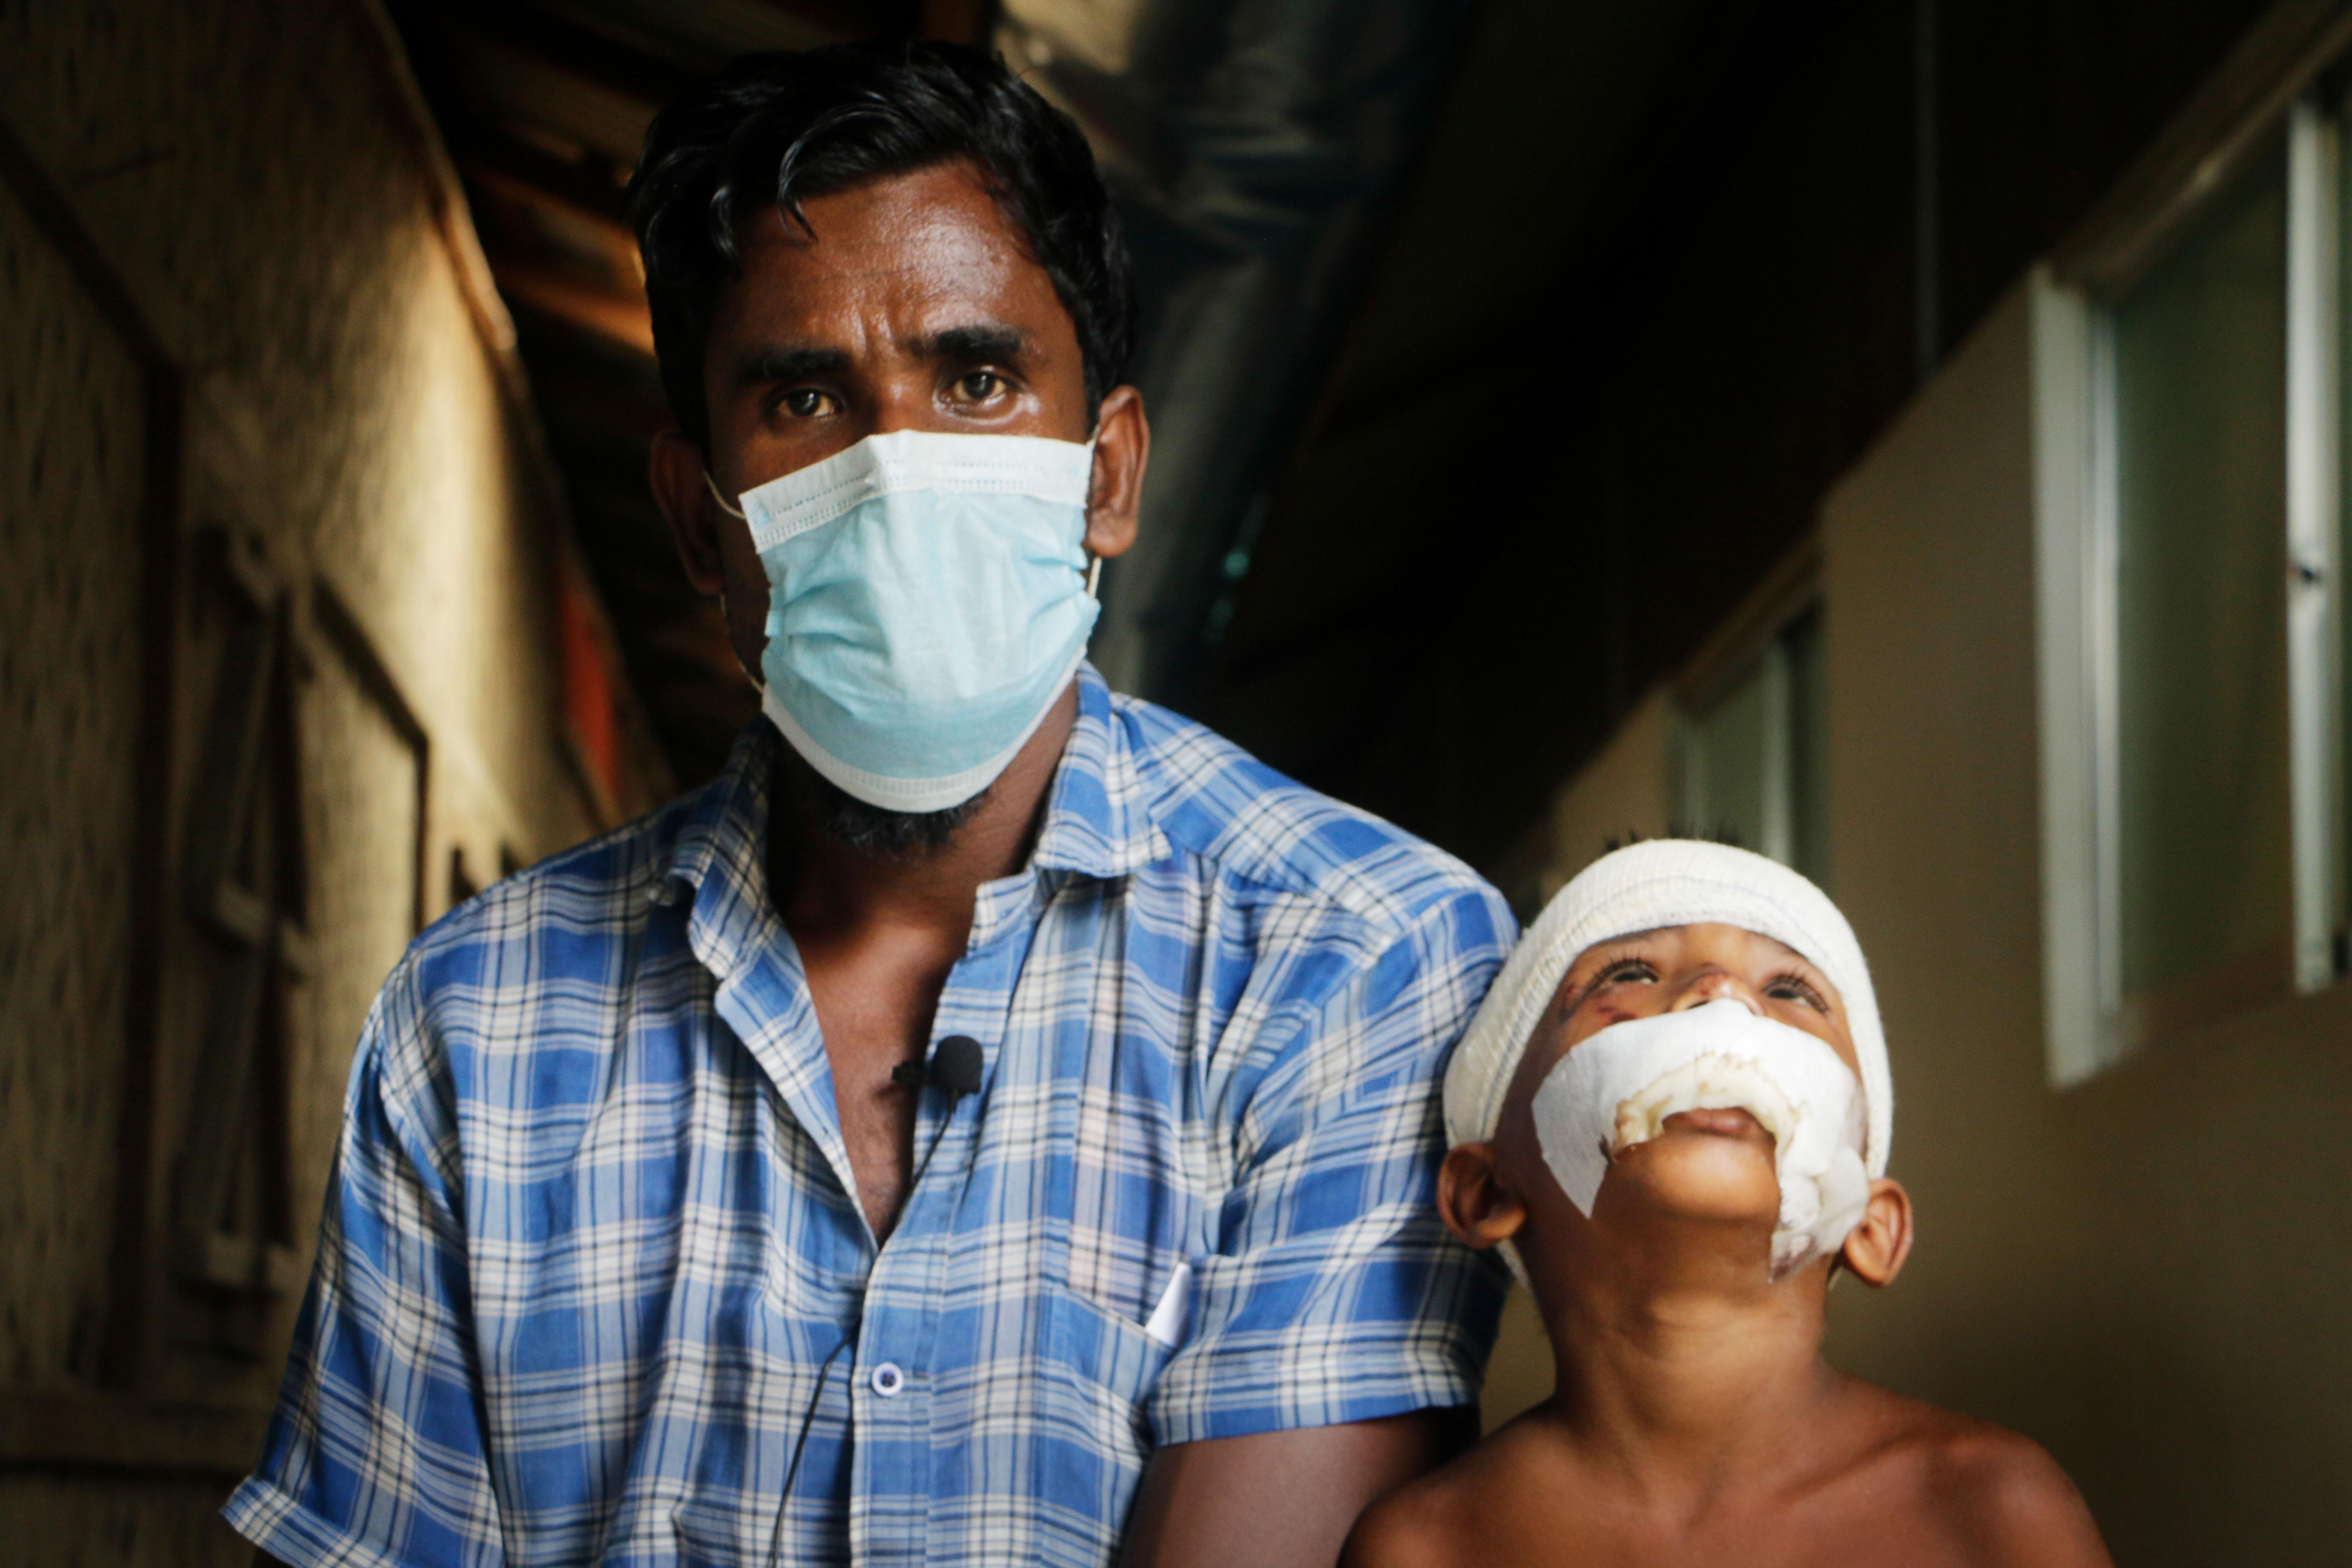 Father and son who are patients at MSF’s Kutupalong hospital in Bangladesh